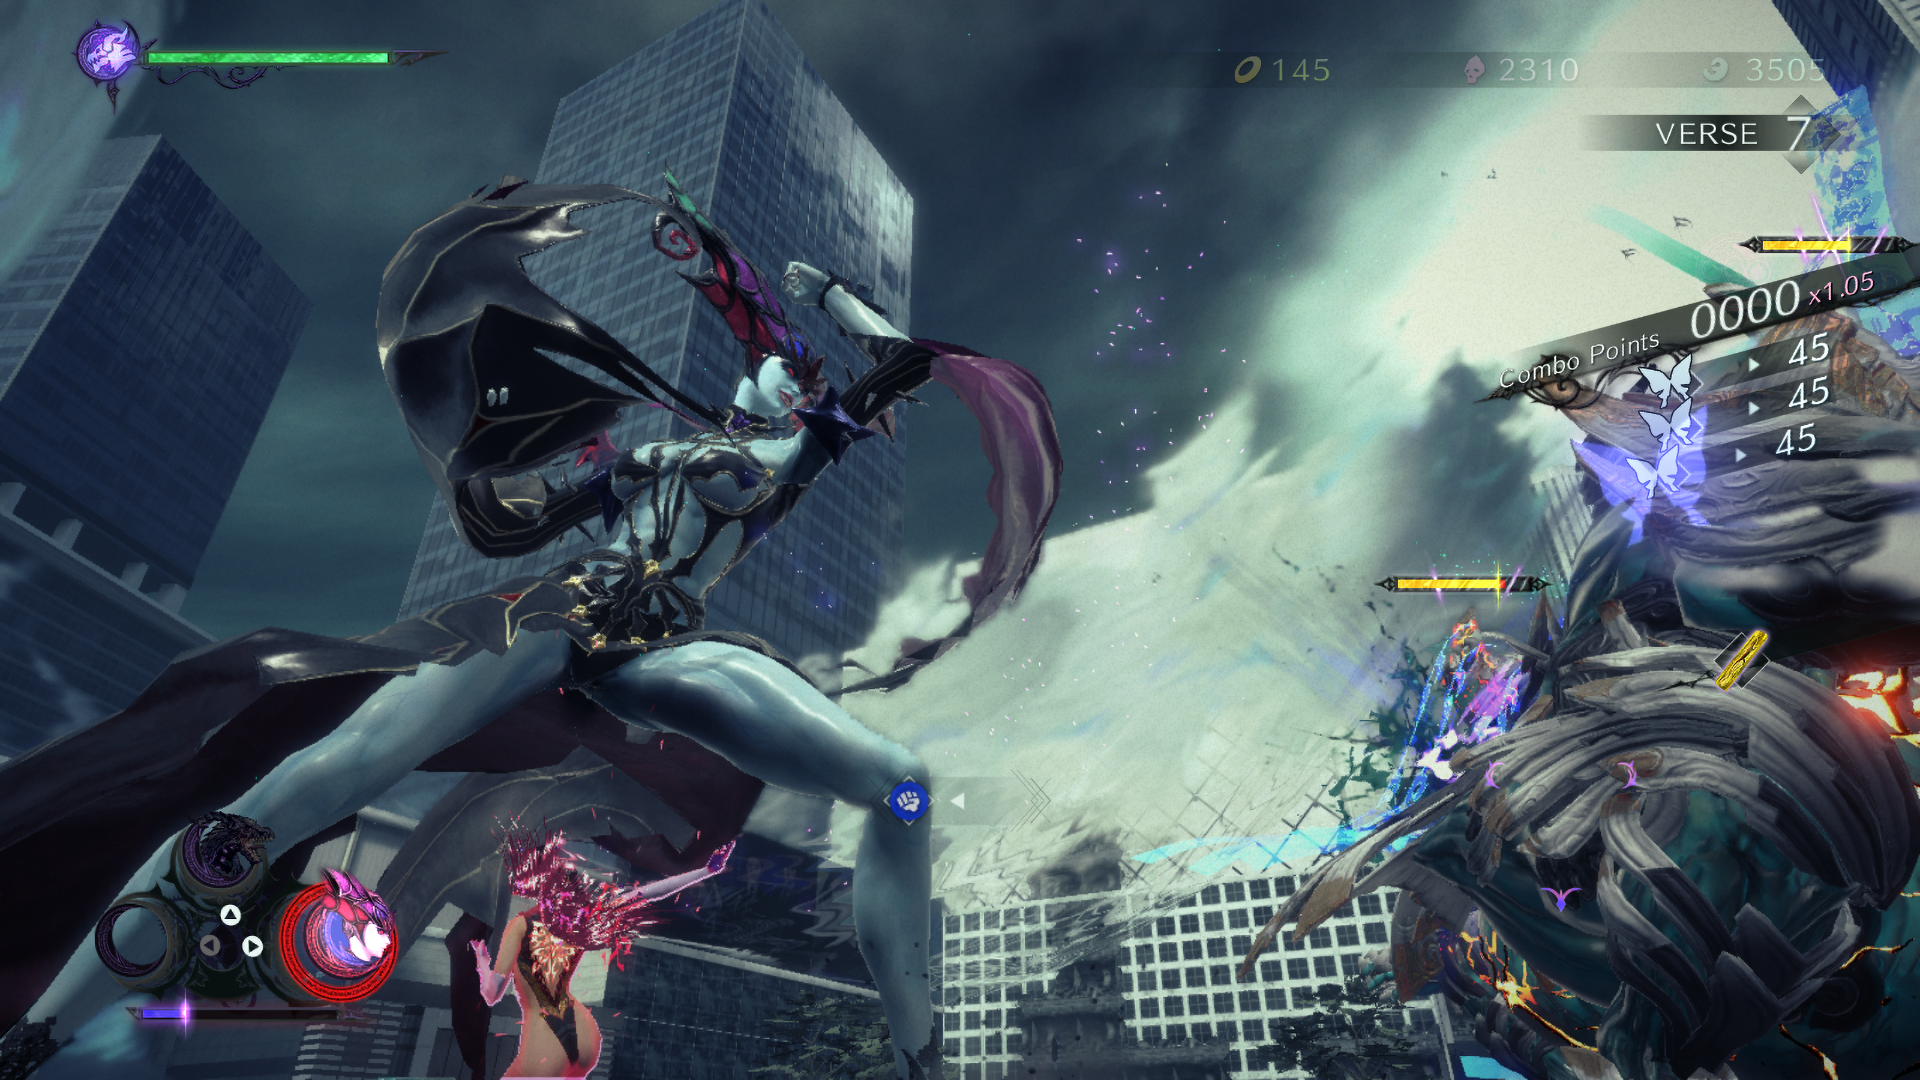 Bayonetta 2 Review - A Truly Bewitching Experience